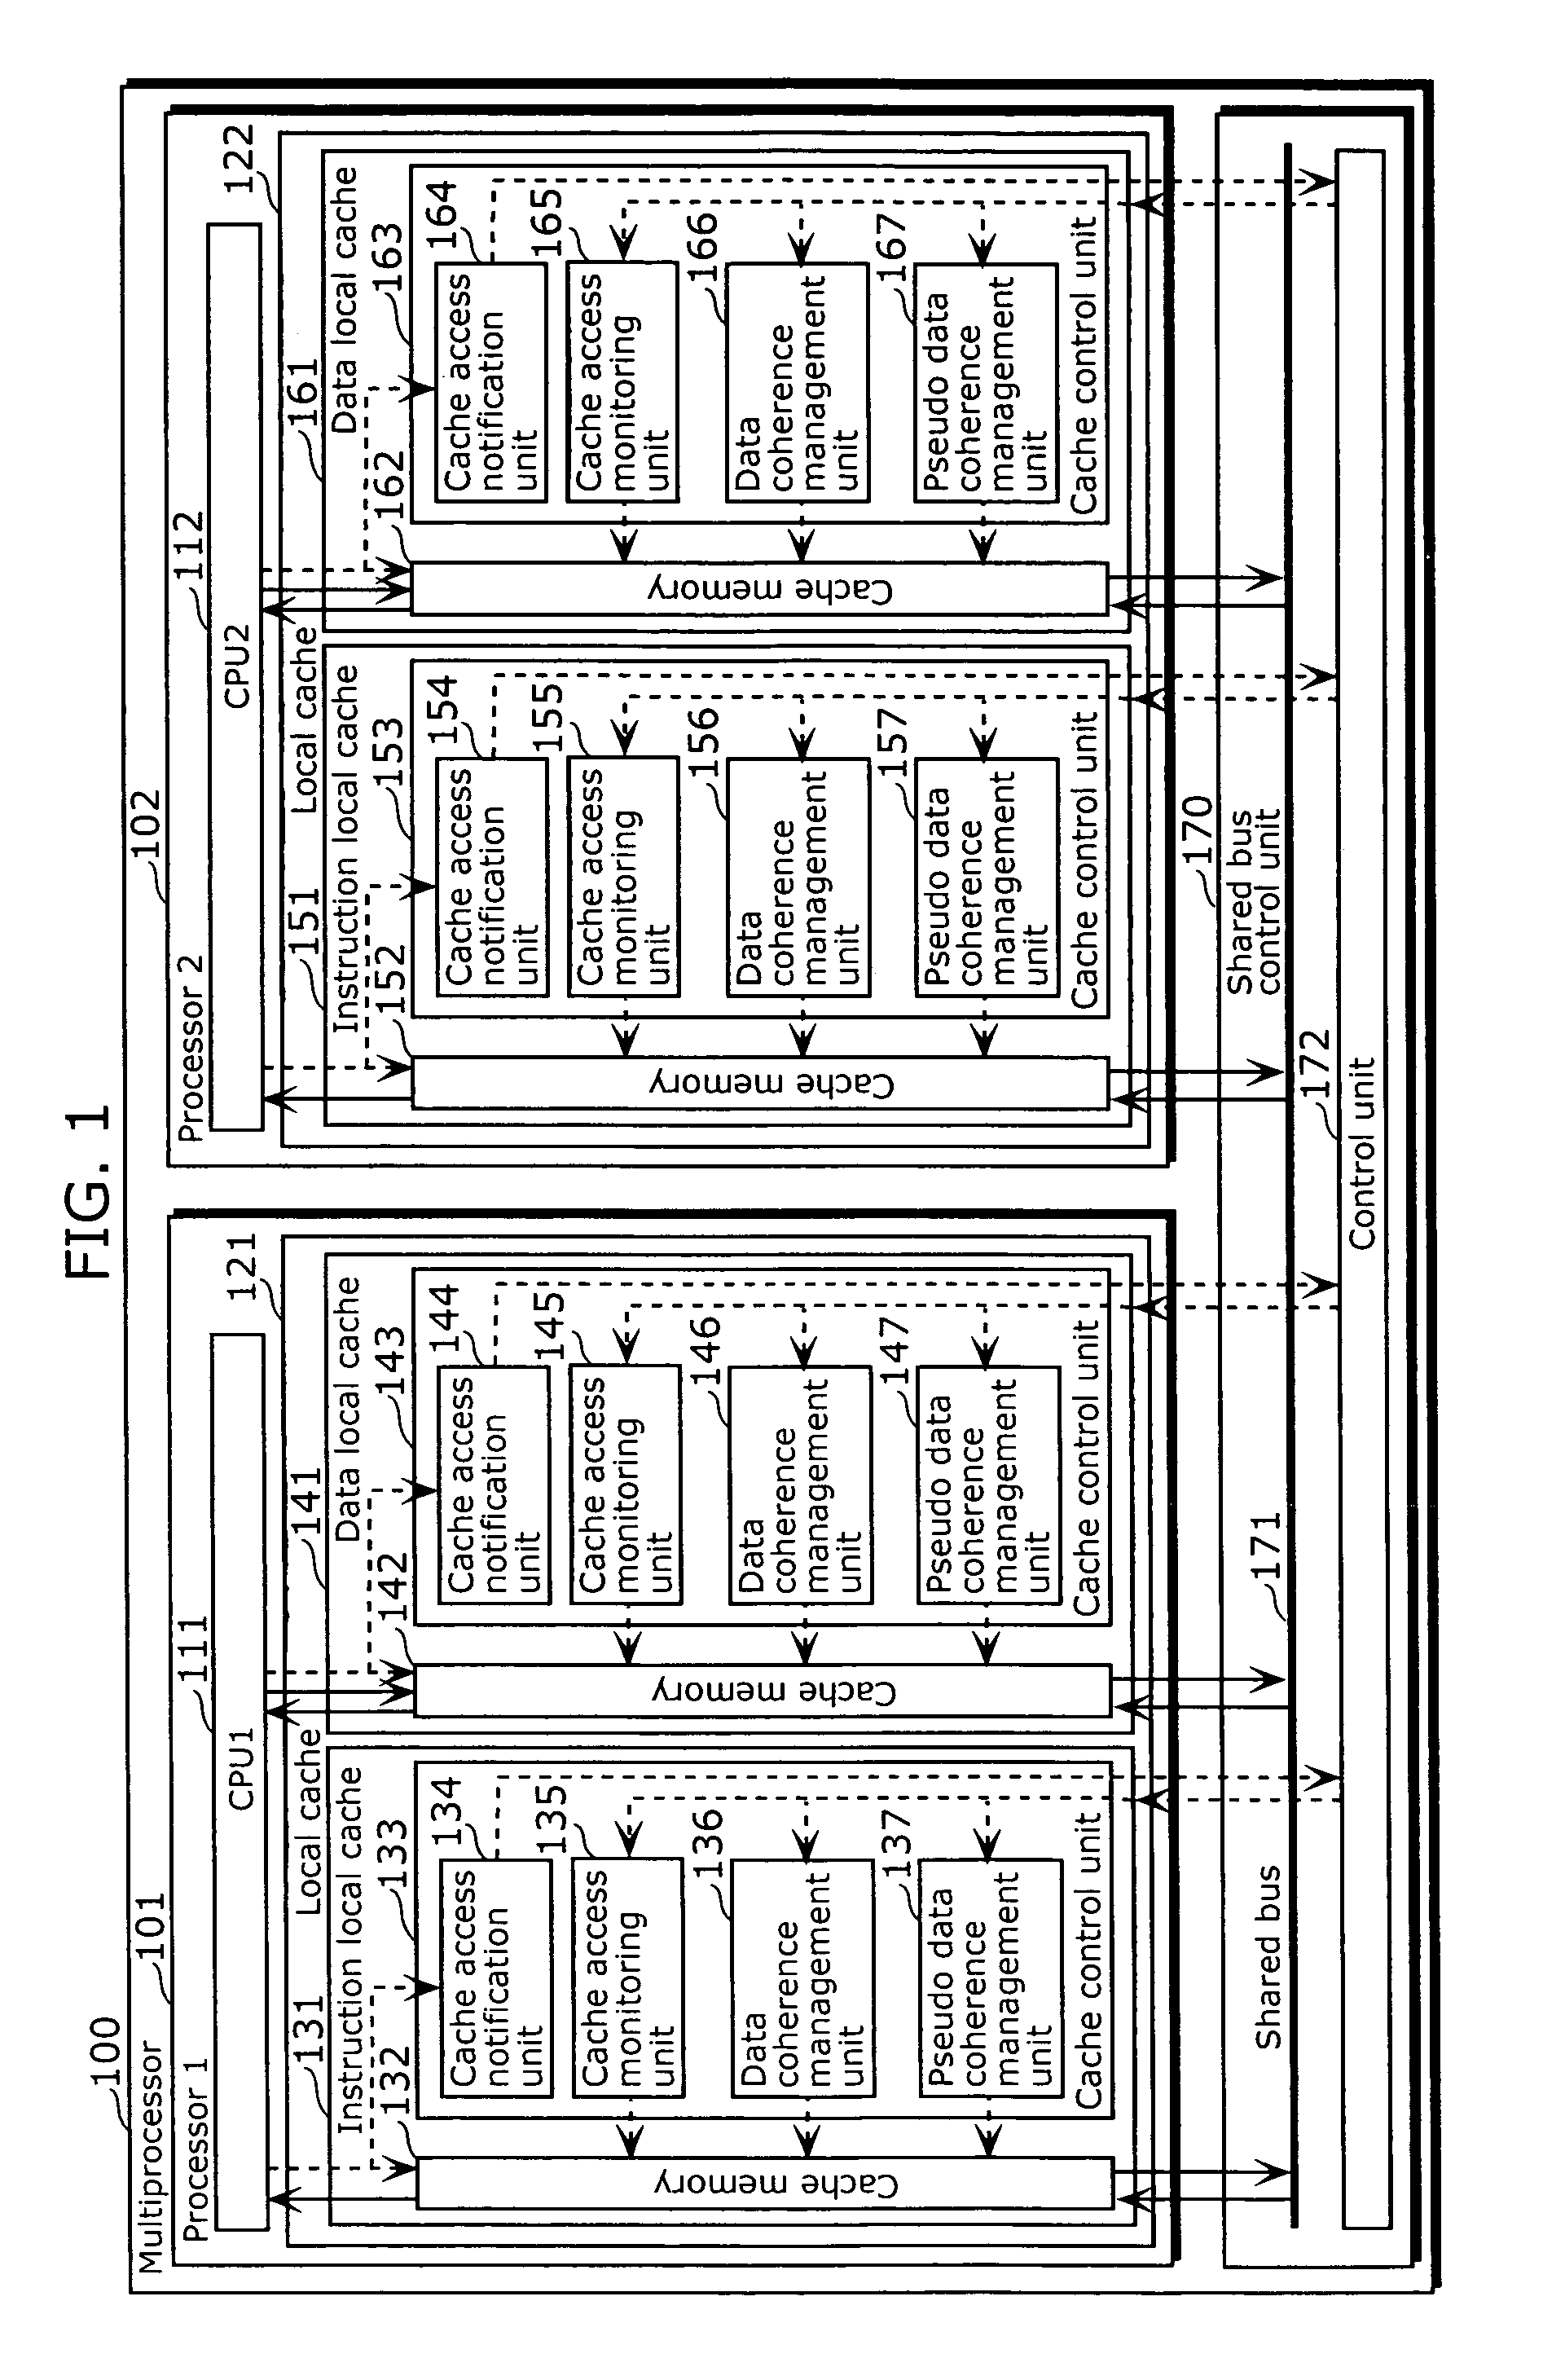 Multiprocessing apparatus having reduced cache miss occurrences